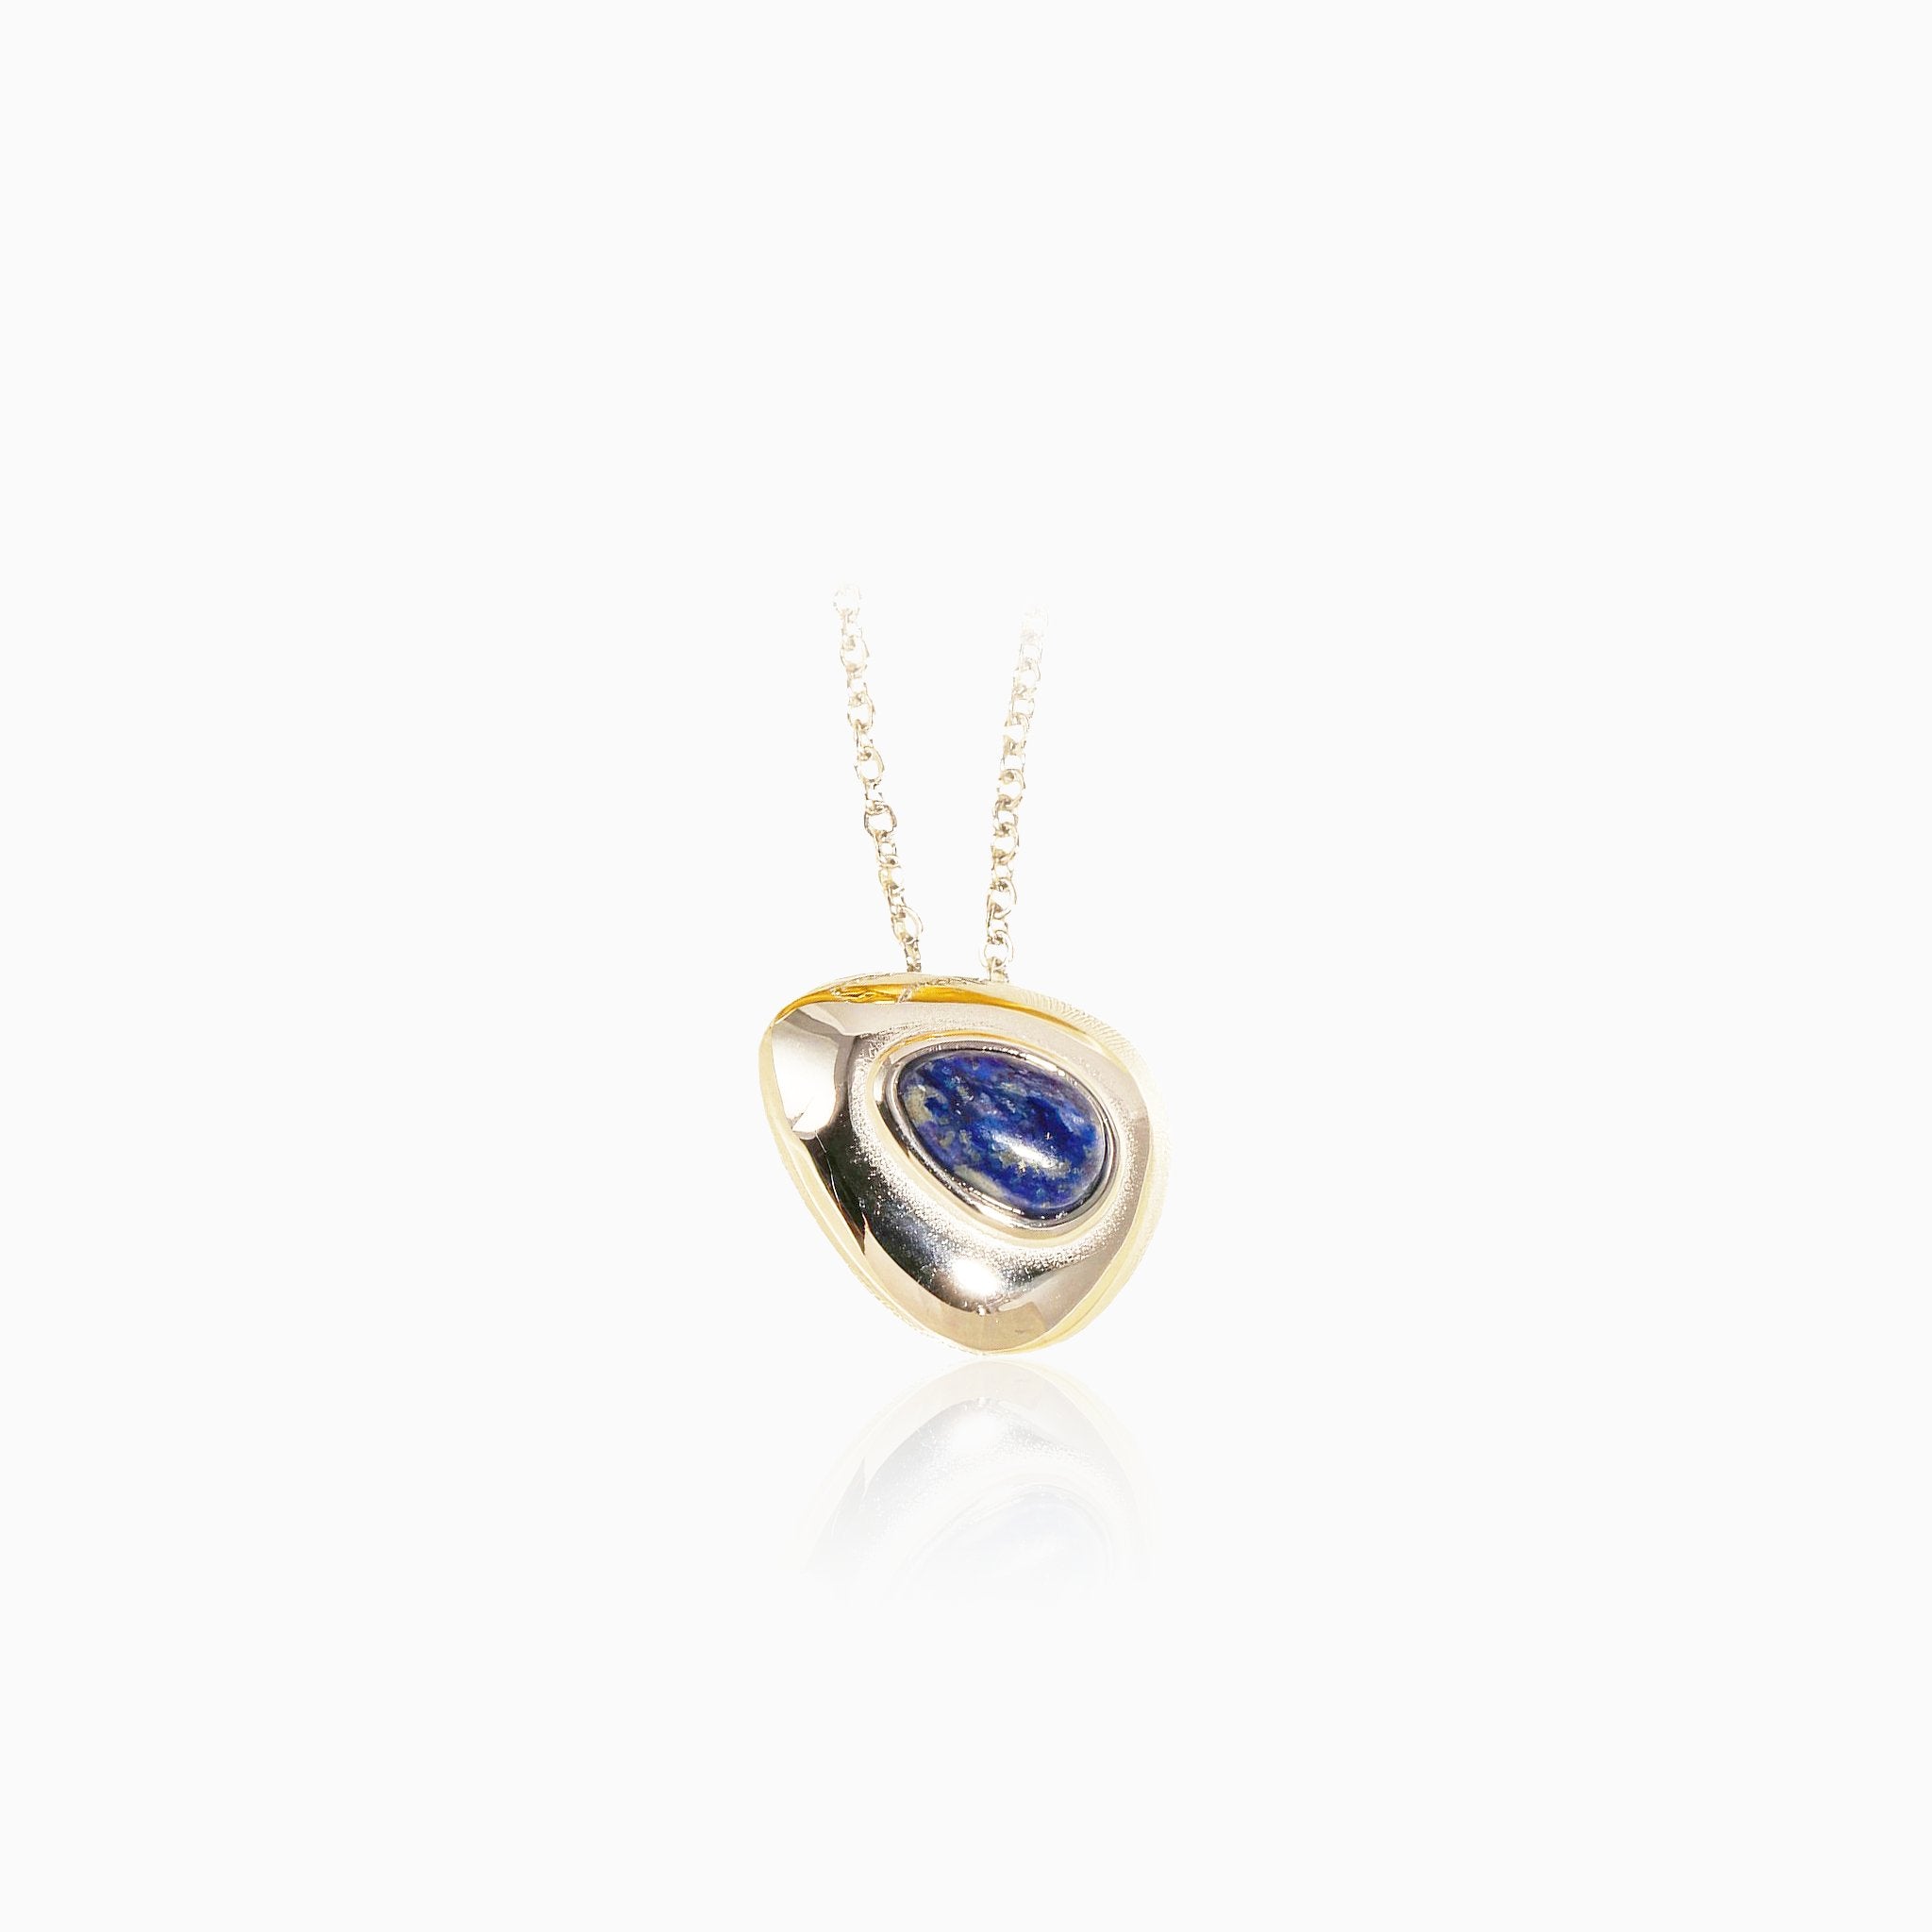 Retro Lapis Lazuli & Pearl Set - Nobbier - Necklace - 18K Gold And Titanium PVD Coated Jewelry